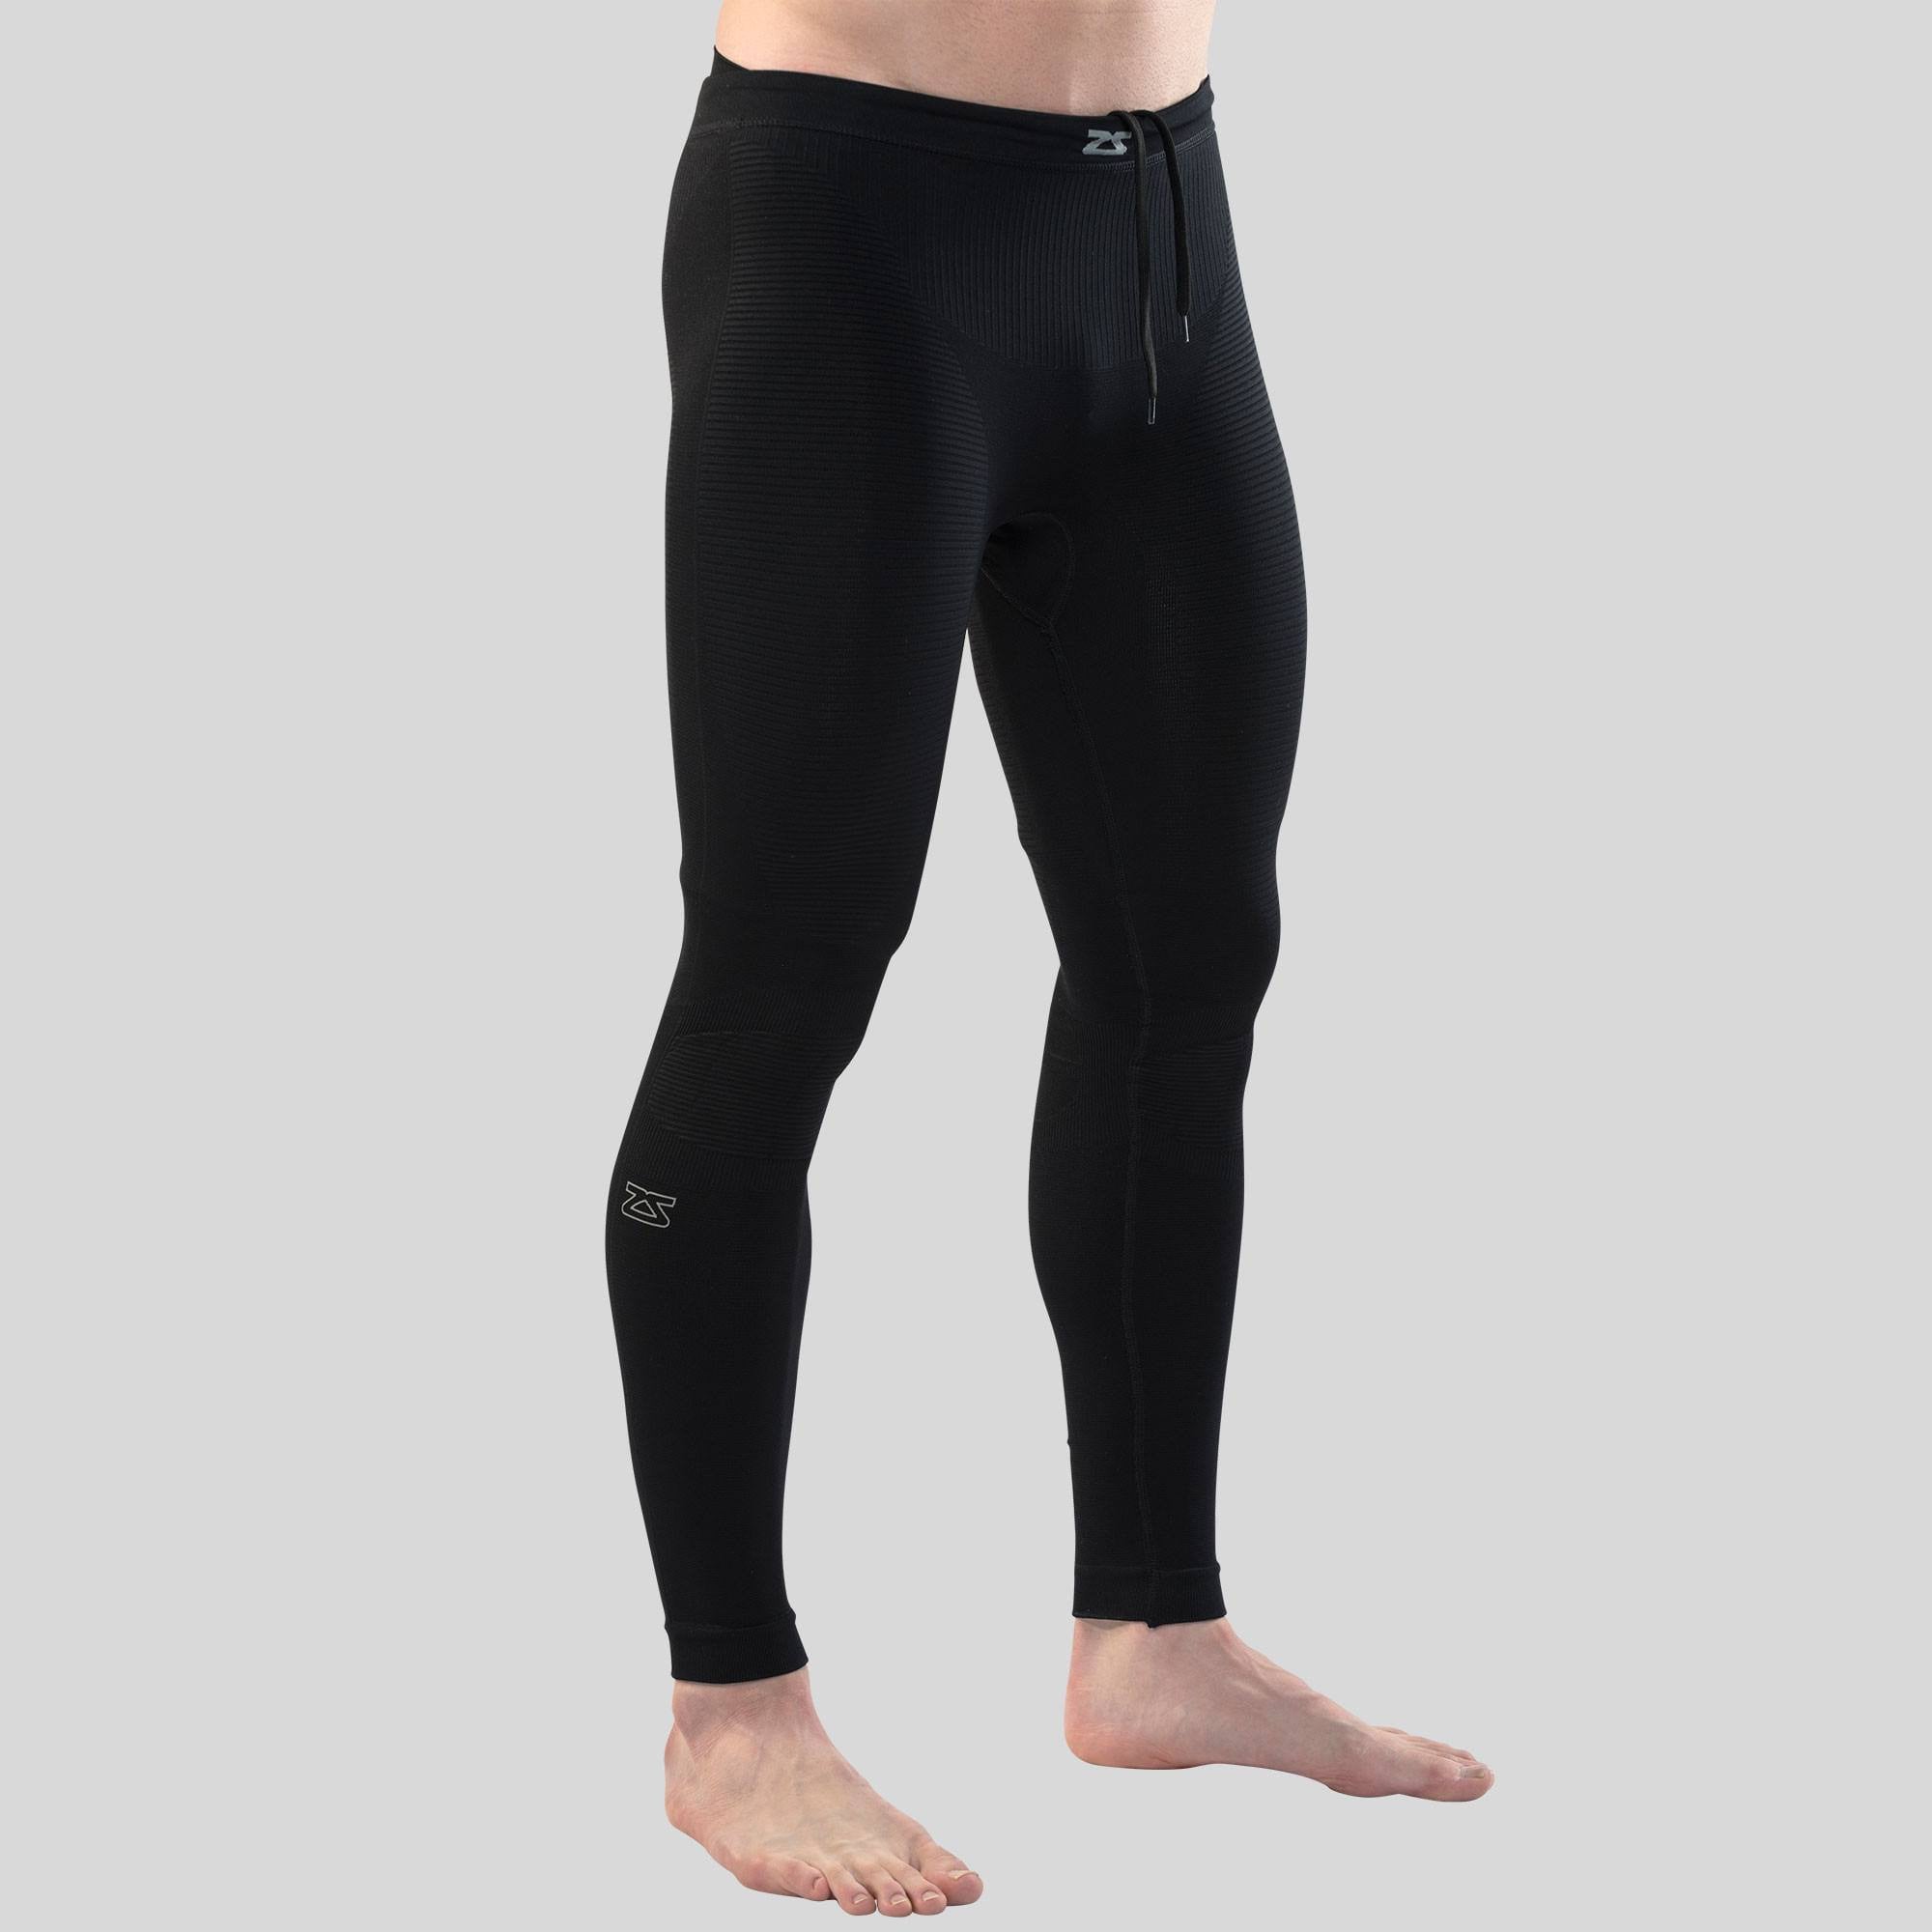 Nike Compression Tights - Buy Nike Compression Tights online in India